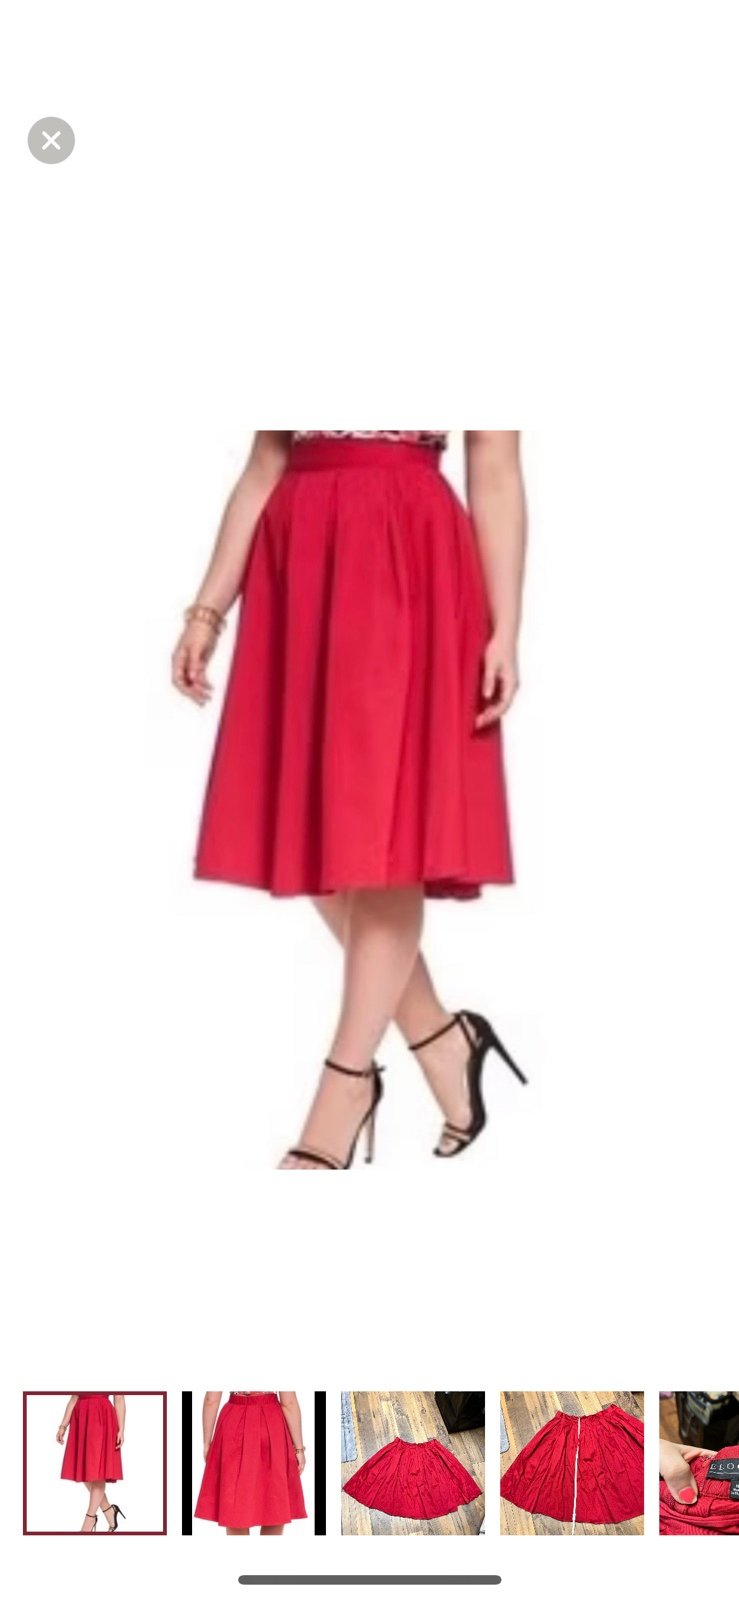 High quality Eloquii Studio Midi Skirt Red Size 18 N moTscGMGb Outlet Store